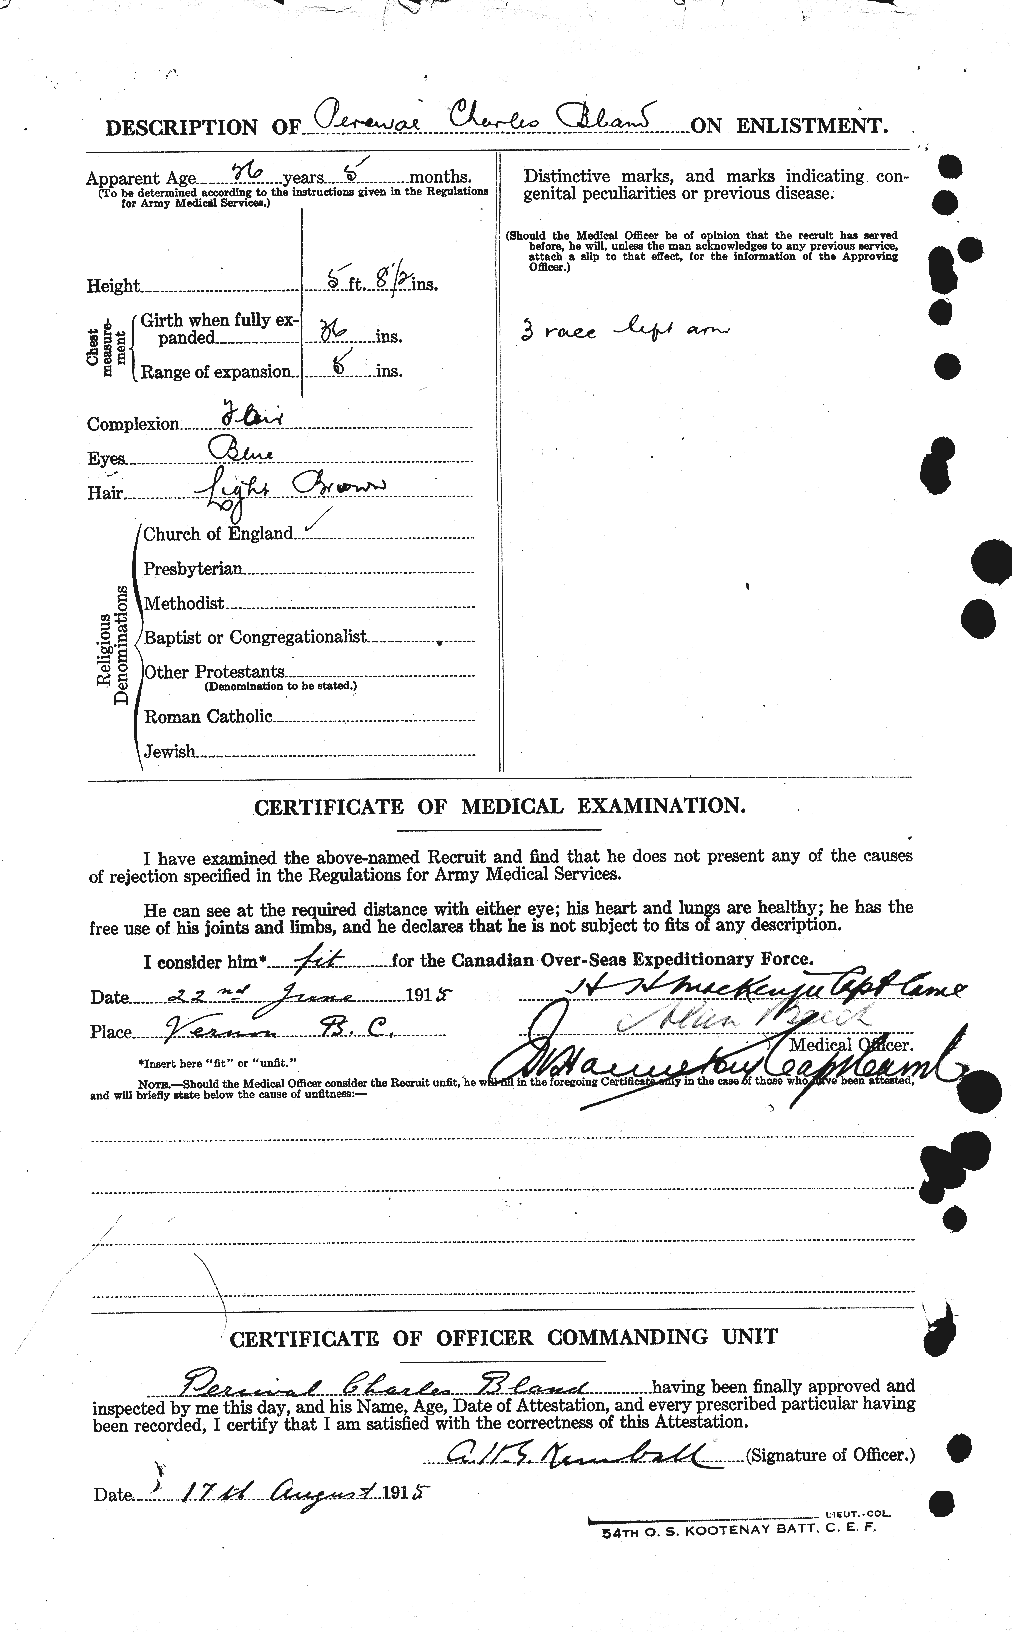 Personnel Records of the First World War - CEF 240656b